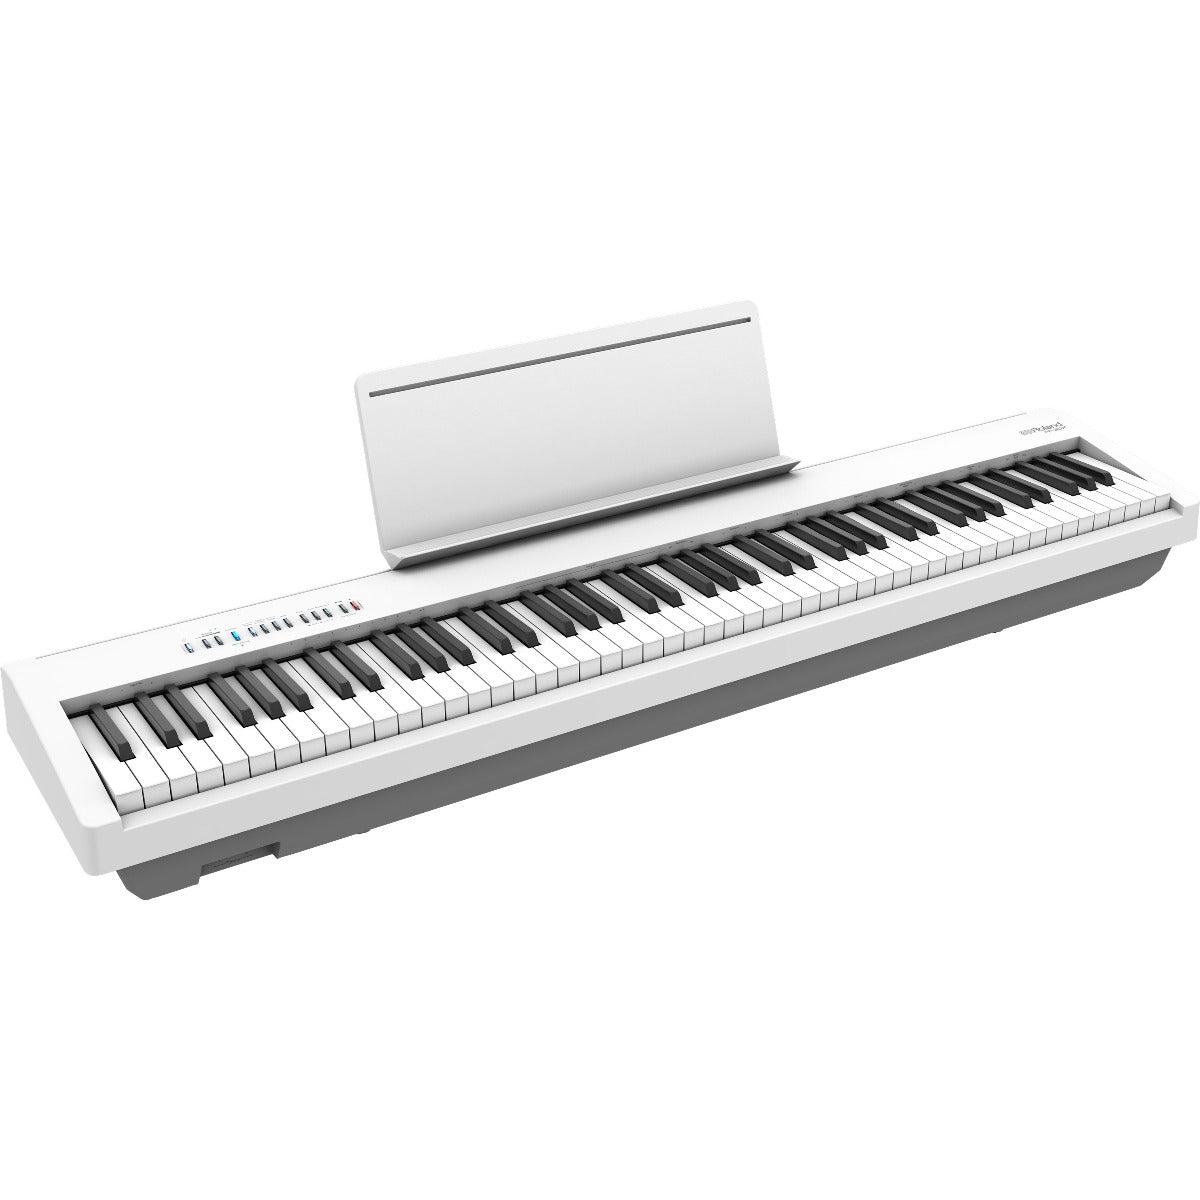 Roland FP-30X Review - The Ultimate Entry-Level Piano?